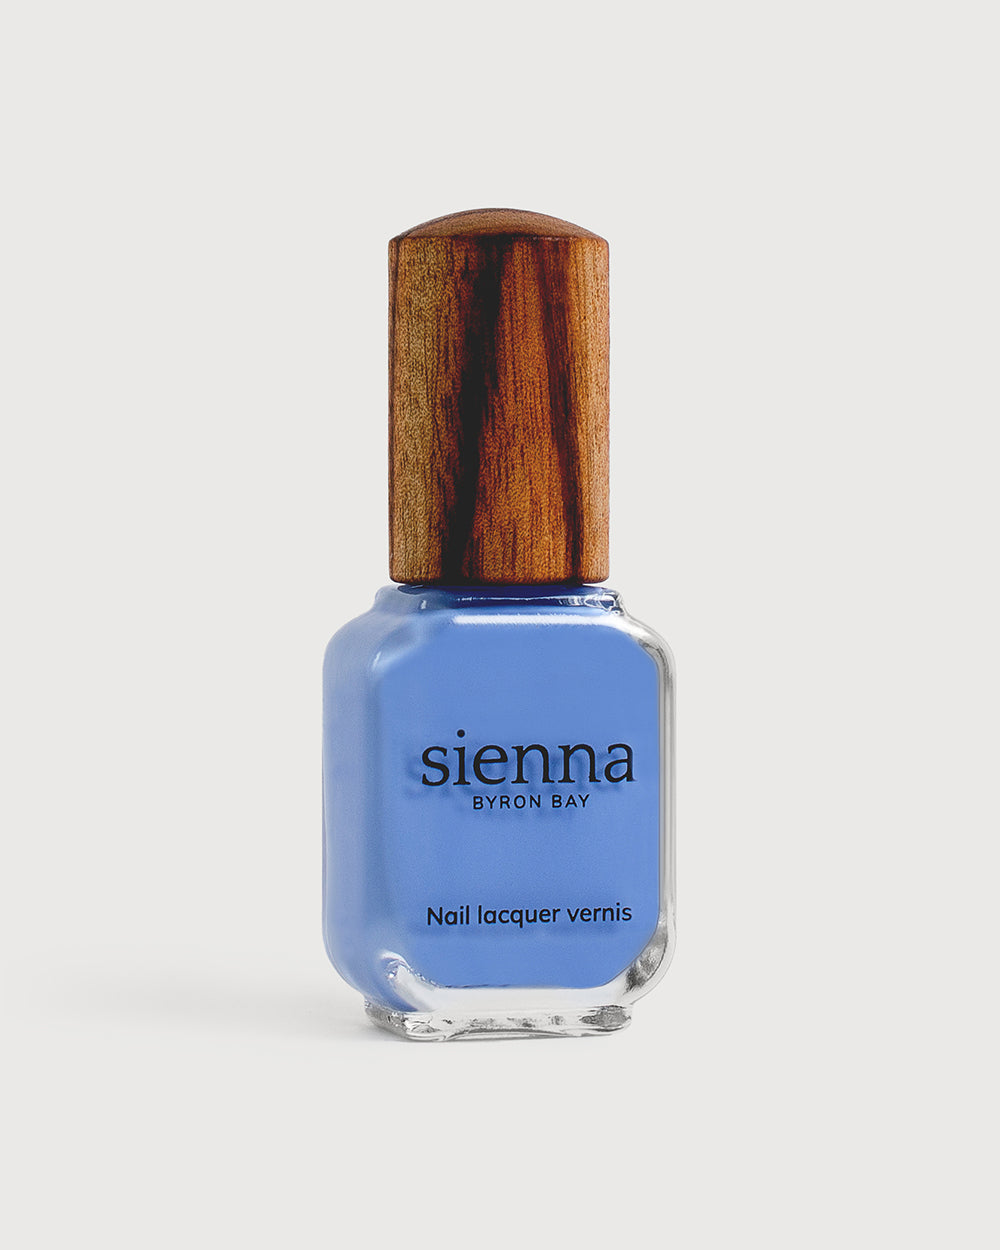  periwinkle blue nail polish in a bottle with a timber cap 